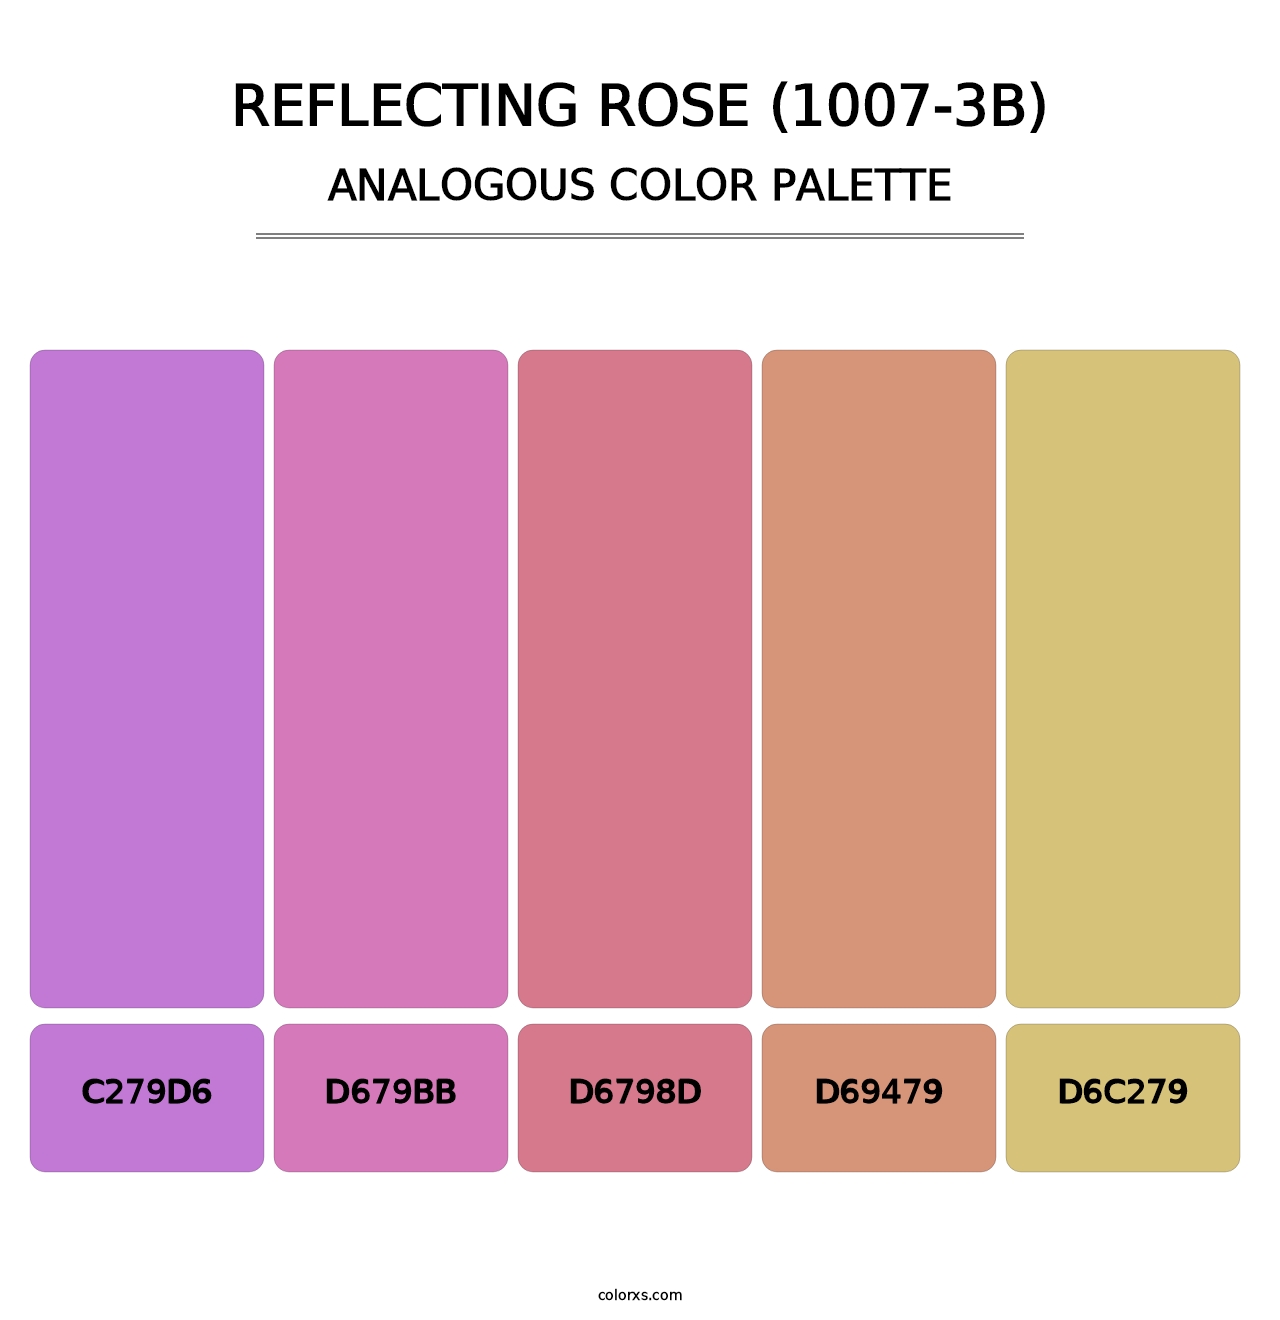 Reflecting Rose (1007-3B) - Analogous Color Palette